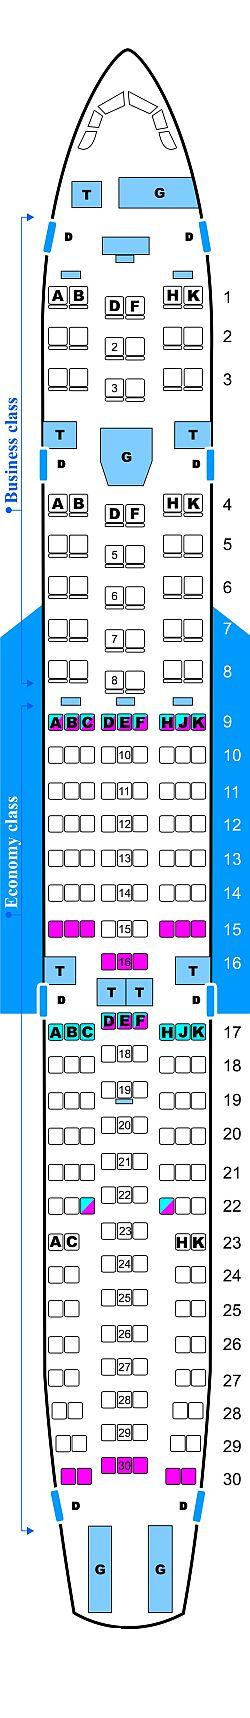 Level A330 Seat Map